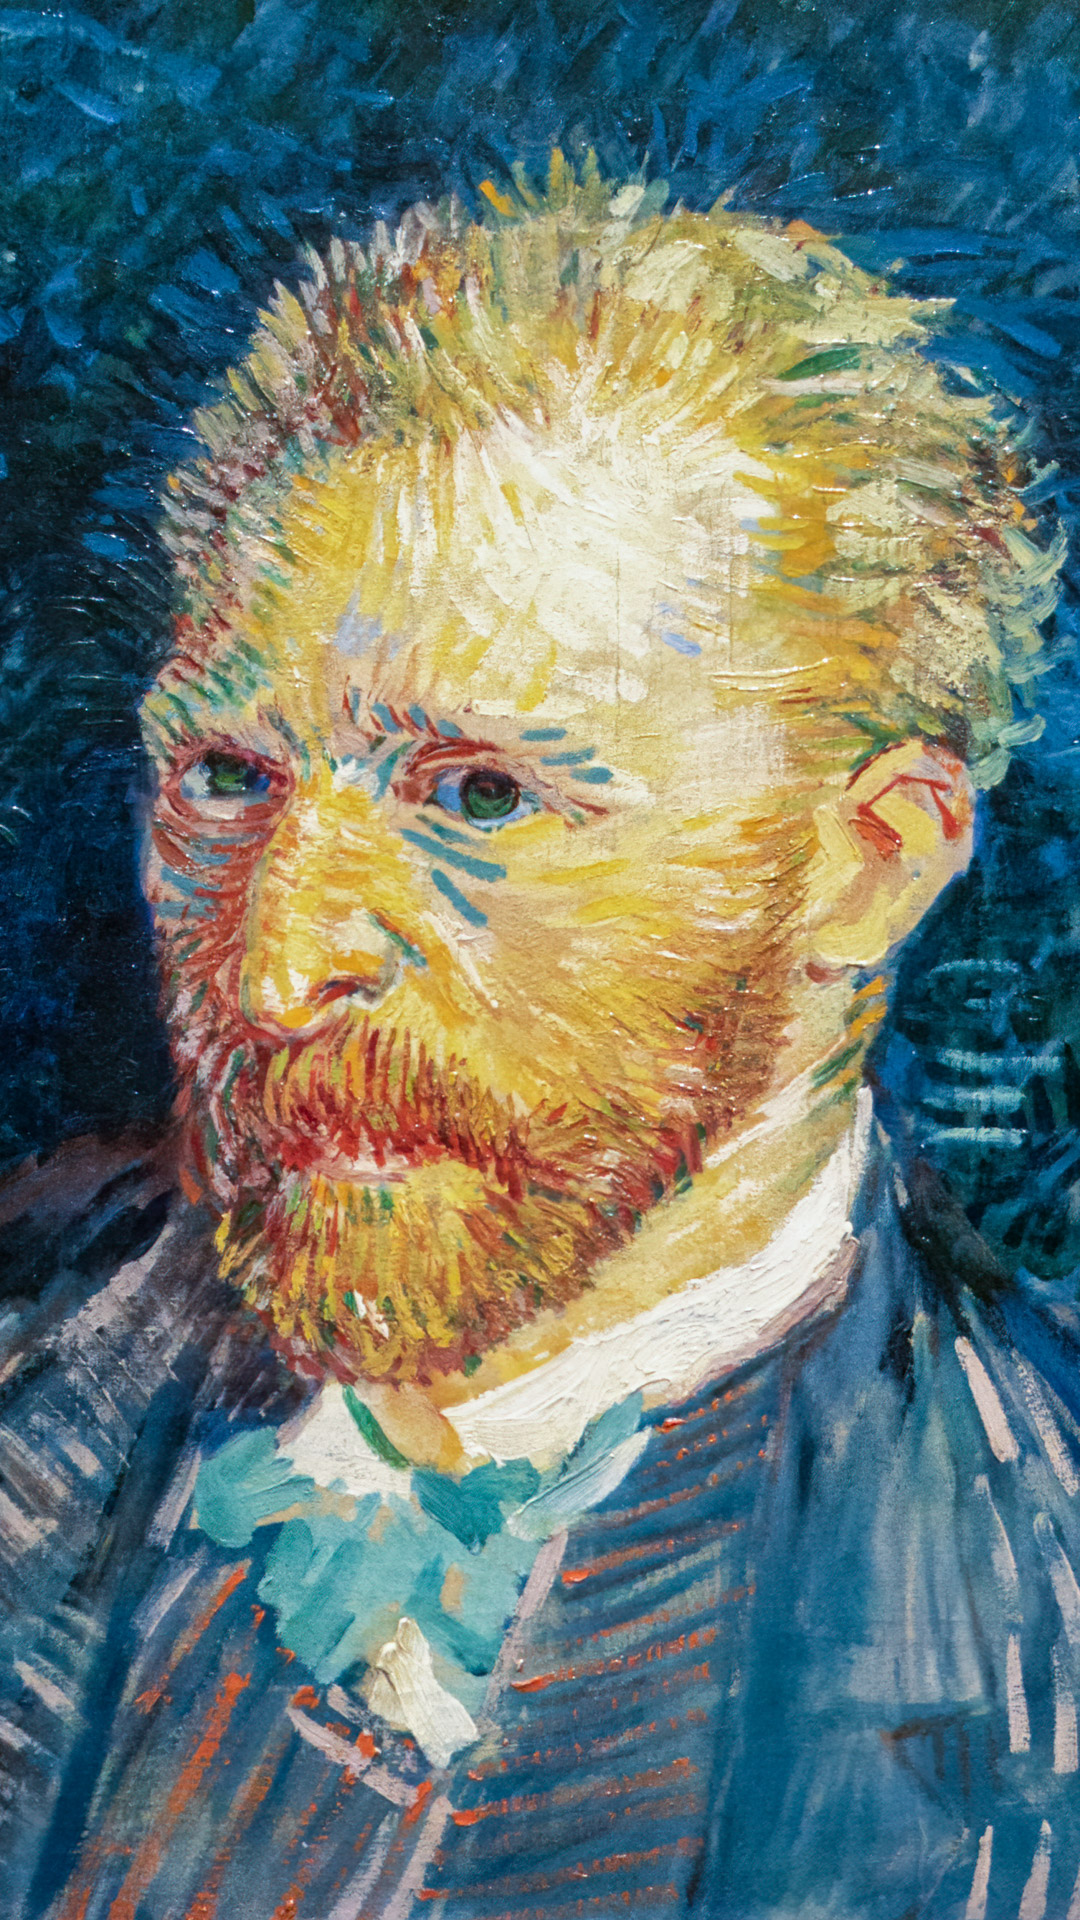 Download this free Van Gogh iPhone wallpaper and make your screen come alive with the vibrant colors and expressive brushstrokes of the legendary Dutch painter.